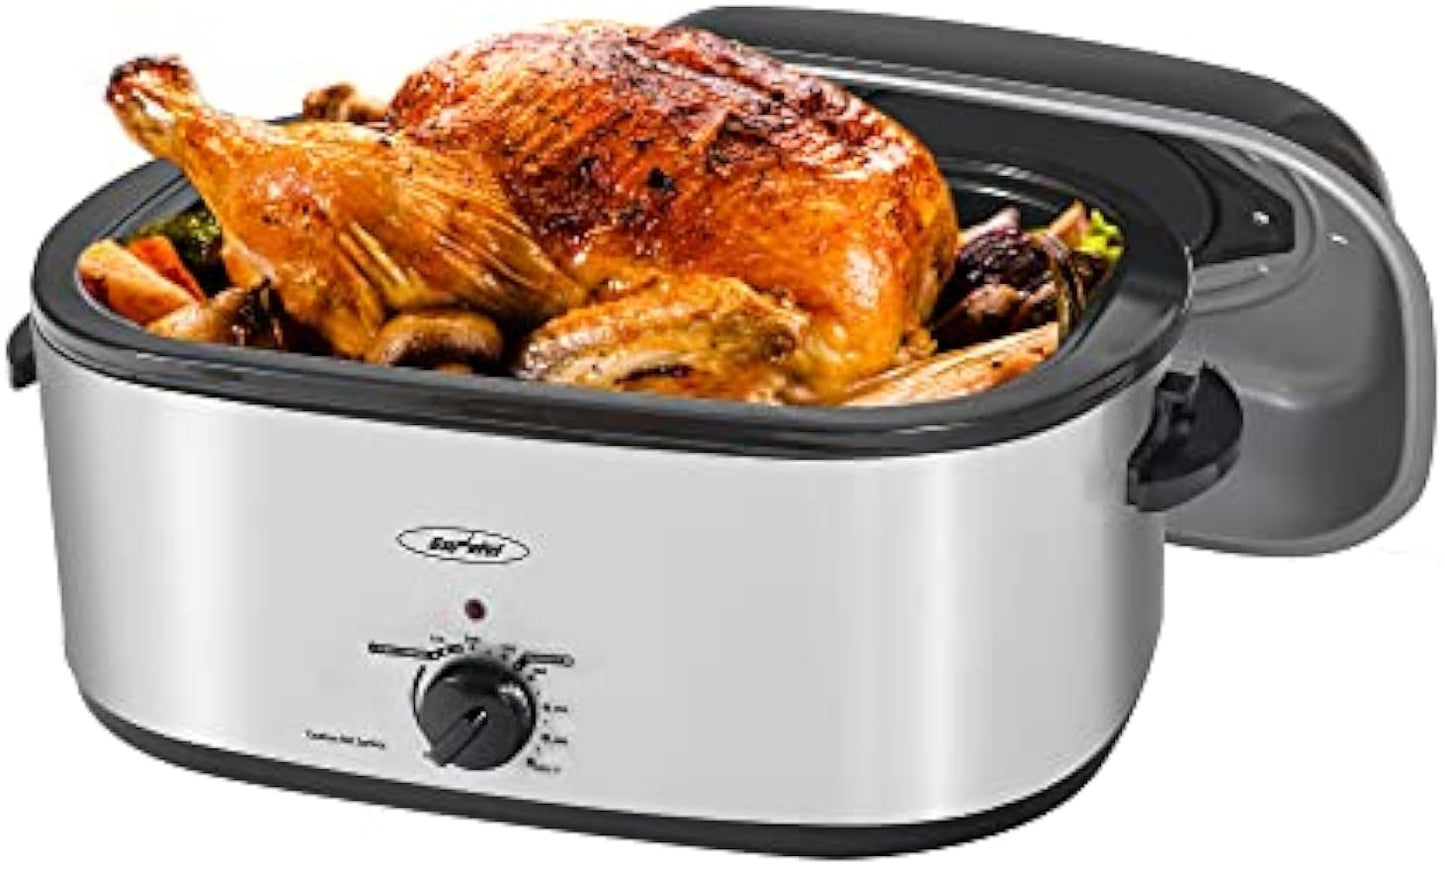 22lb 18-Quart Roaster Oven with Self-Basting Lid, Sunvivi electric roaster with Removable Pan & Rack, 150-450°F Full-Range Temperature Control with Defrost/Warm Function, Stainless Steel, Silver…